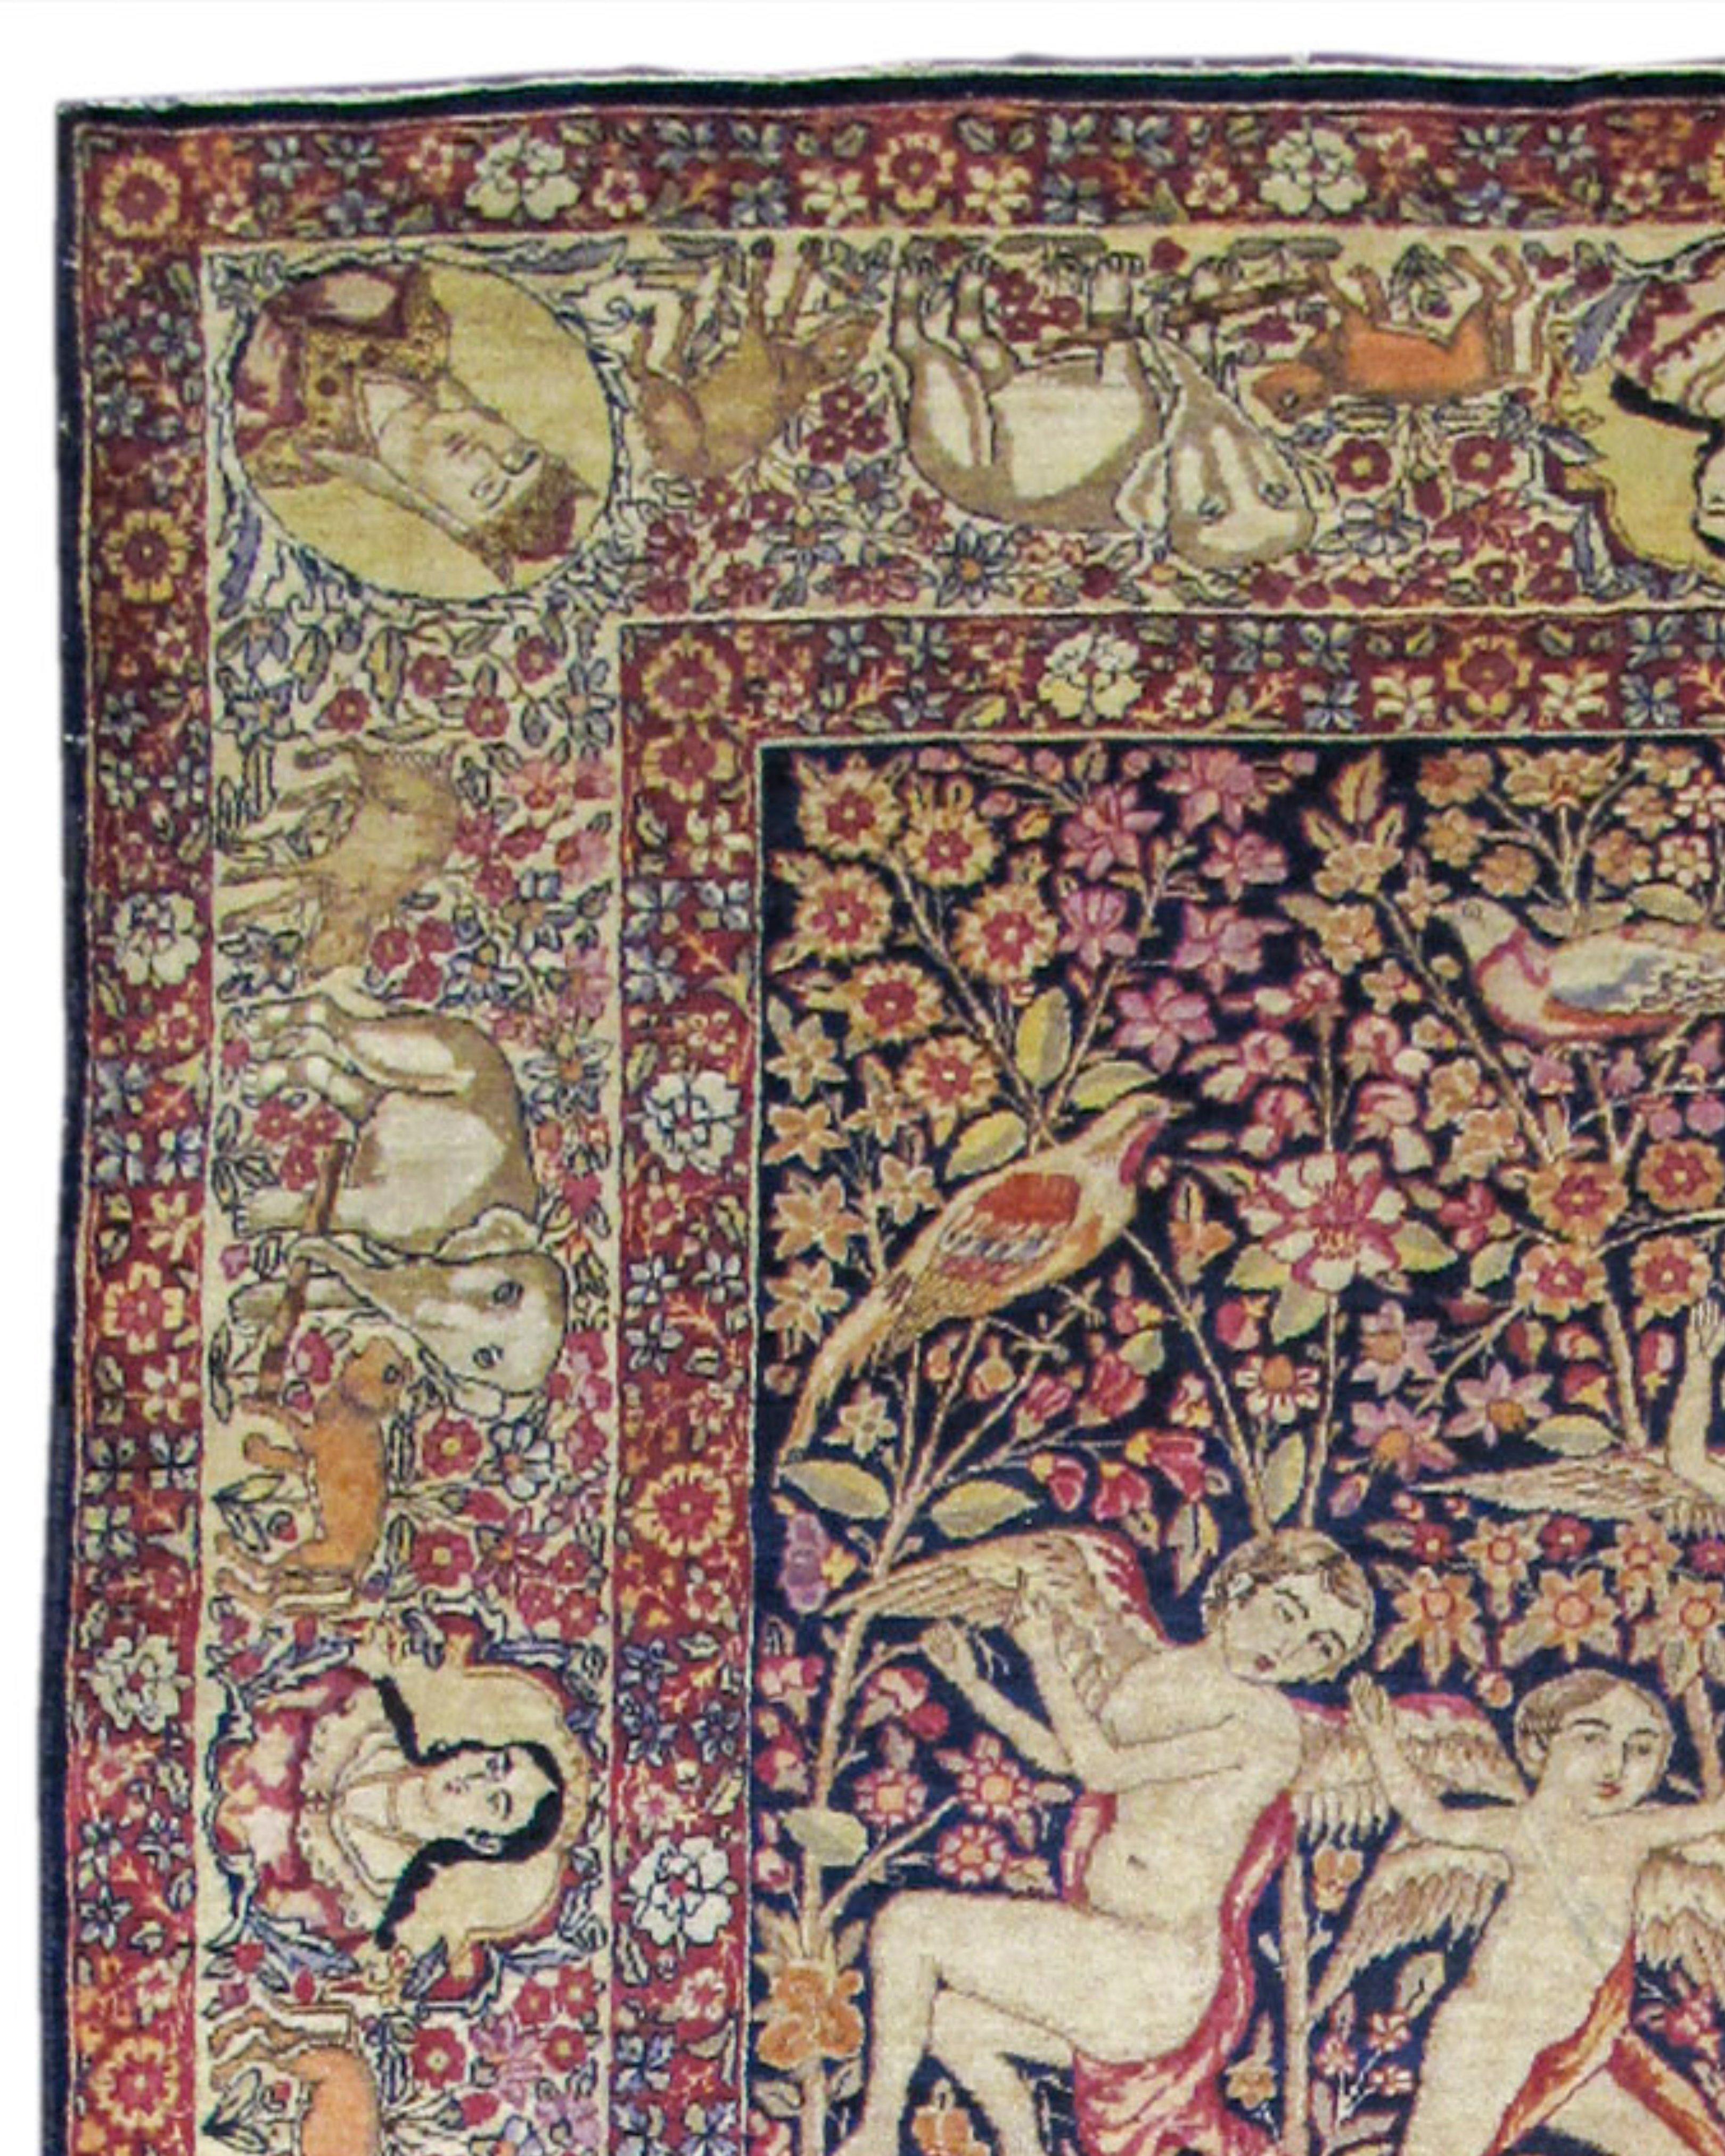 Hand-Woven Antique Persian Kirman Pictorial Rug, 19th Century For Sale